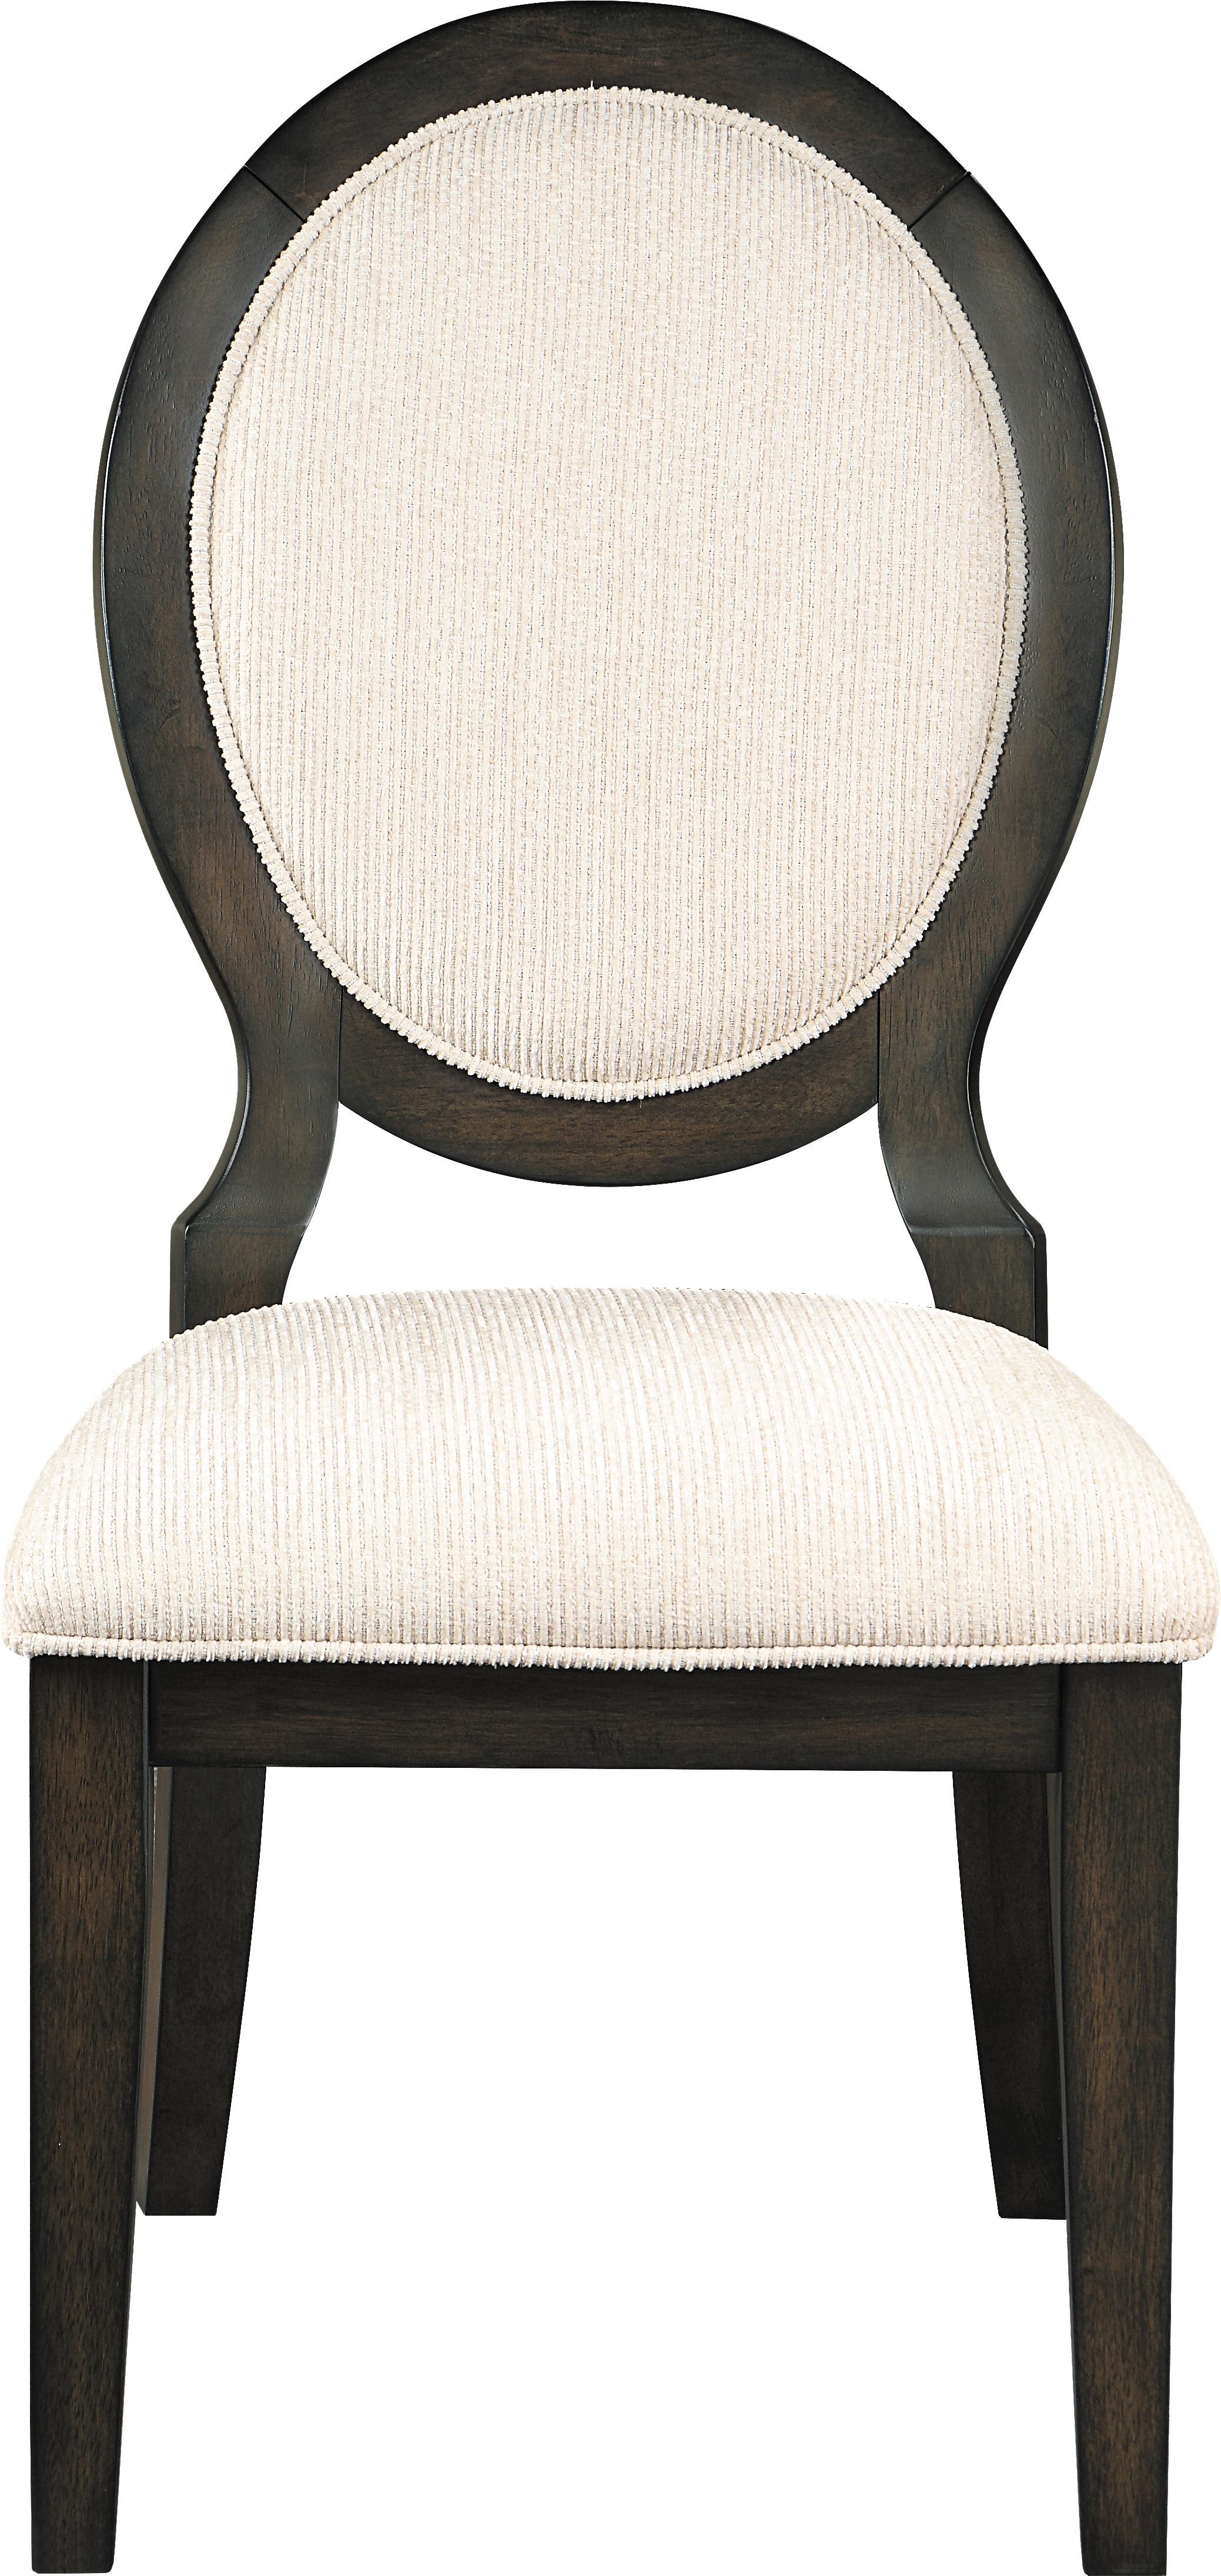 Transitional Side Chair Set 115102 Twyla 115102 in Cocoa 